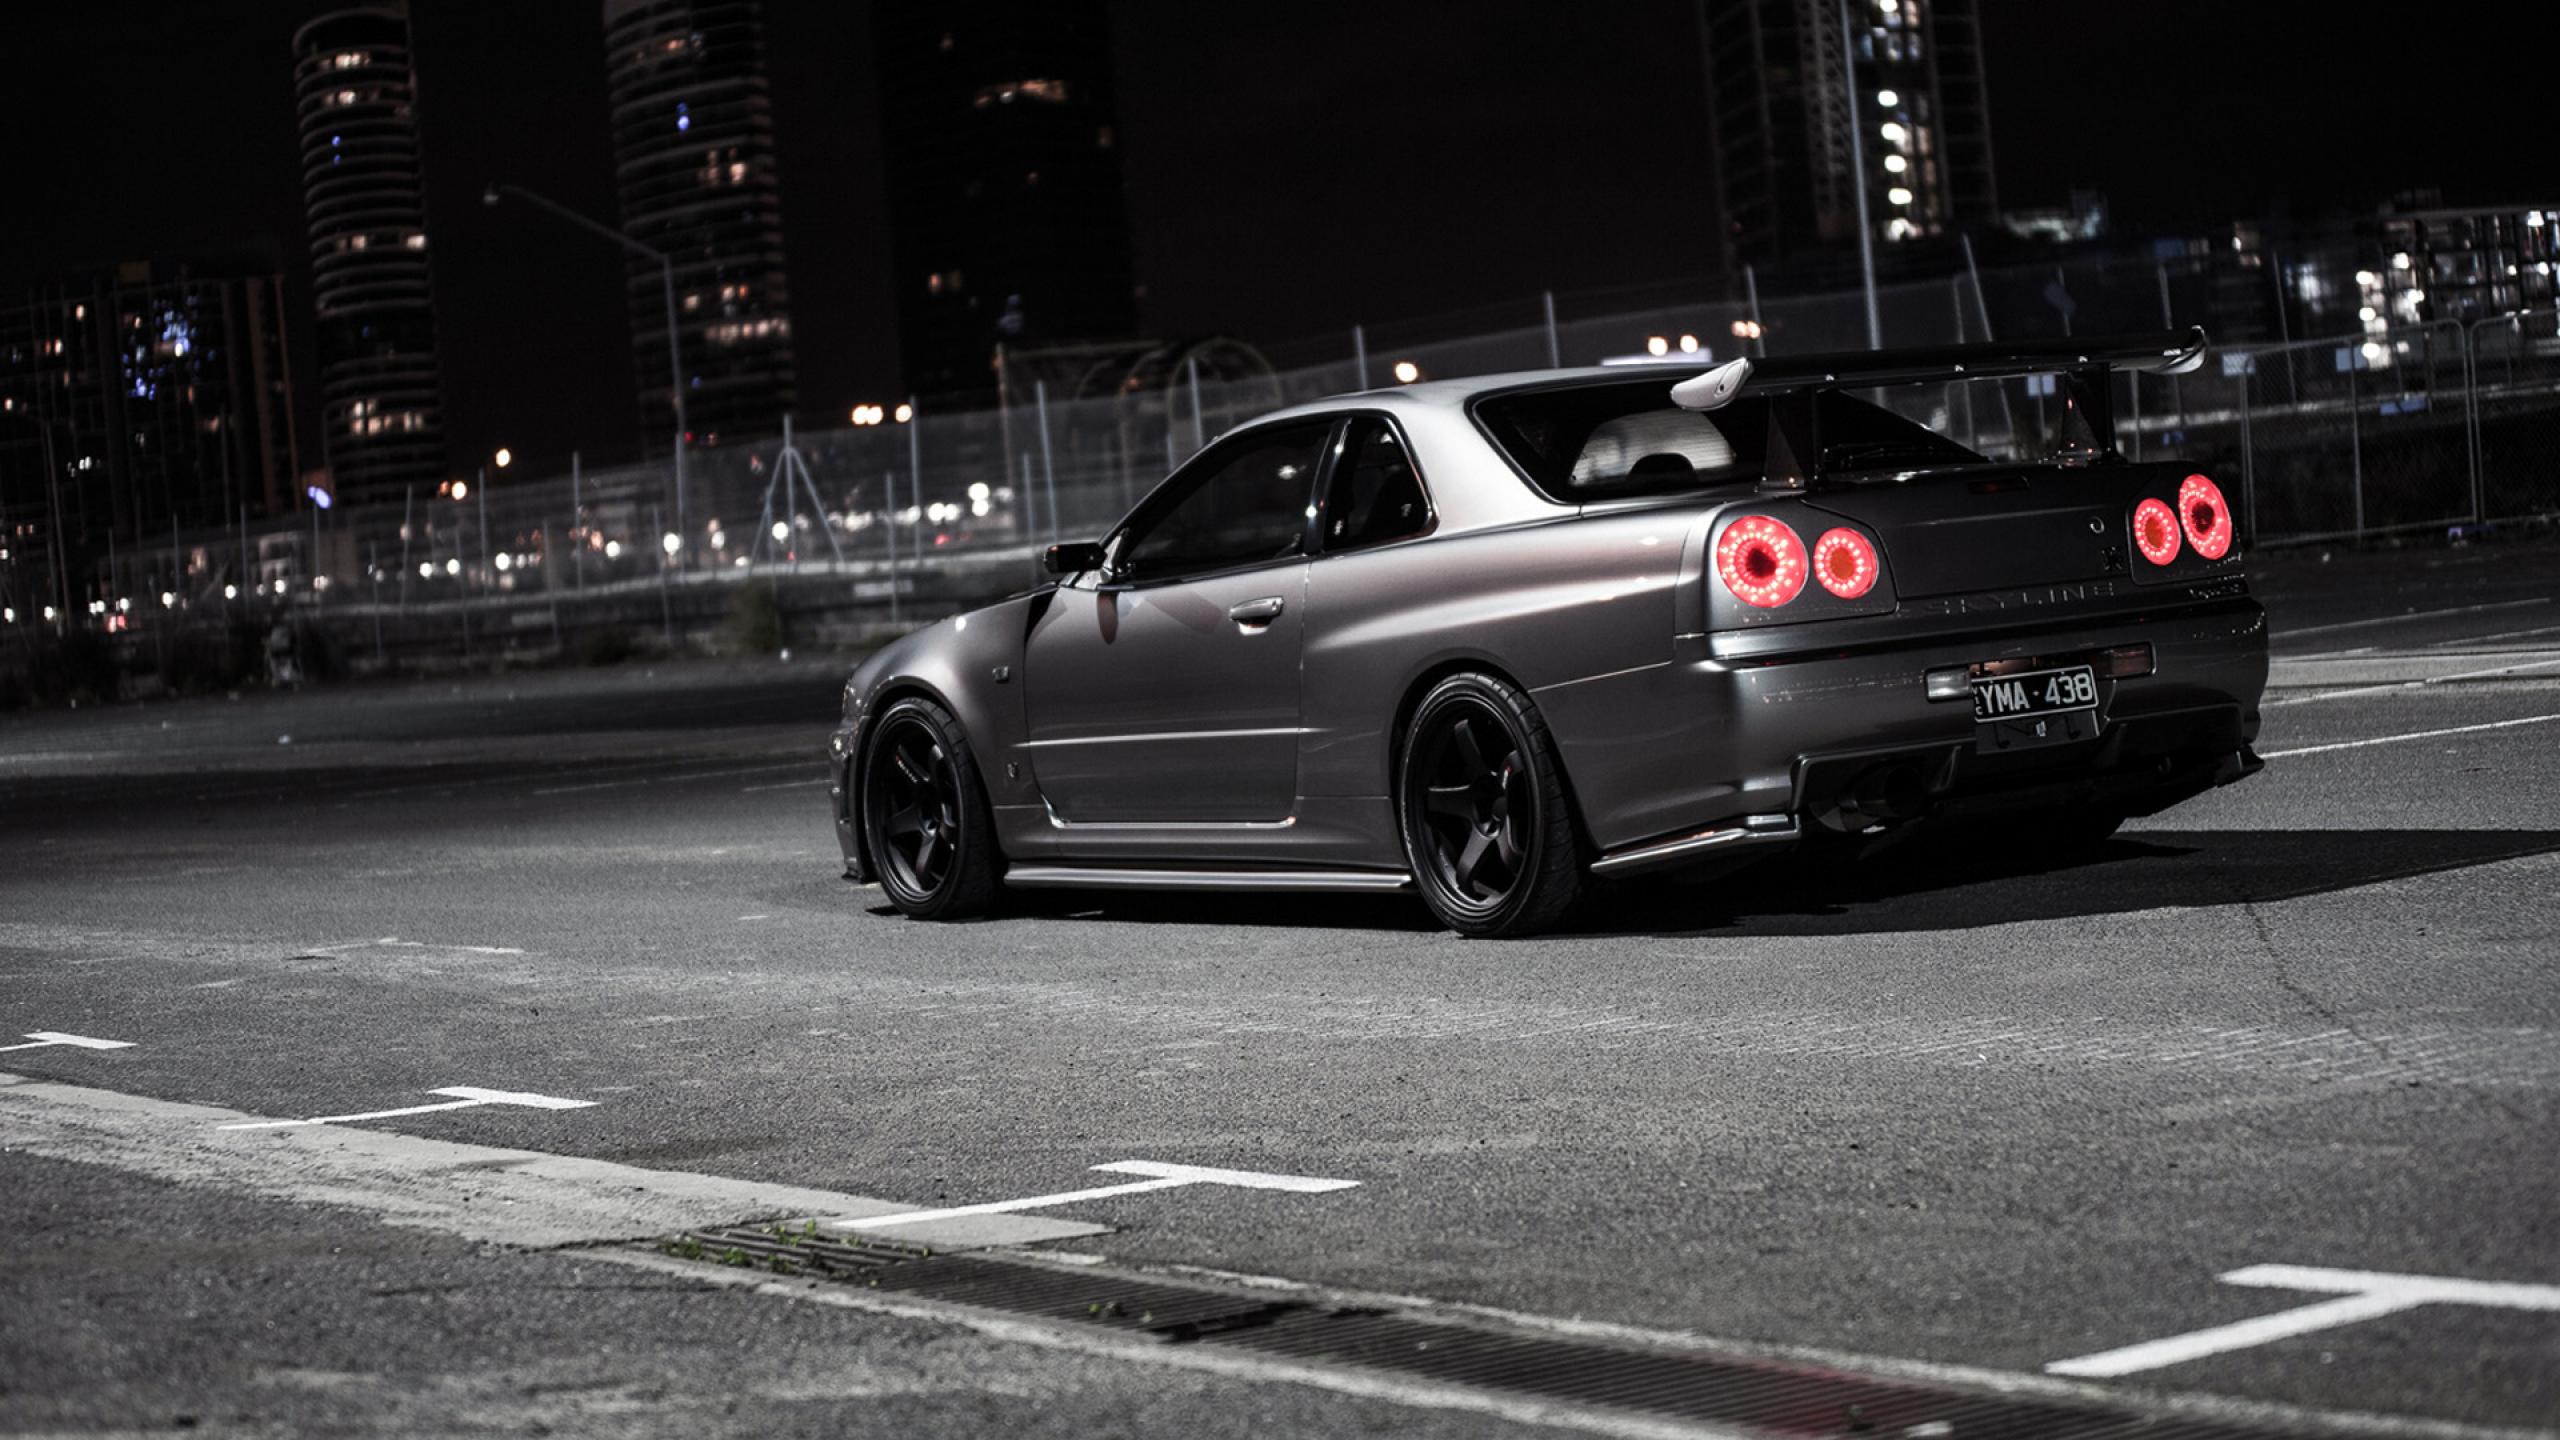 Nissan Skyline GT R Wallpapers HD Full HD Pictures